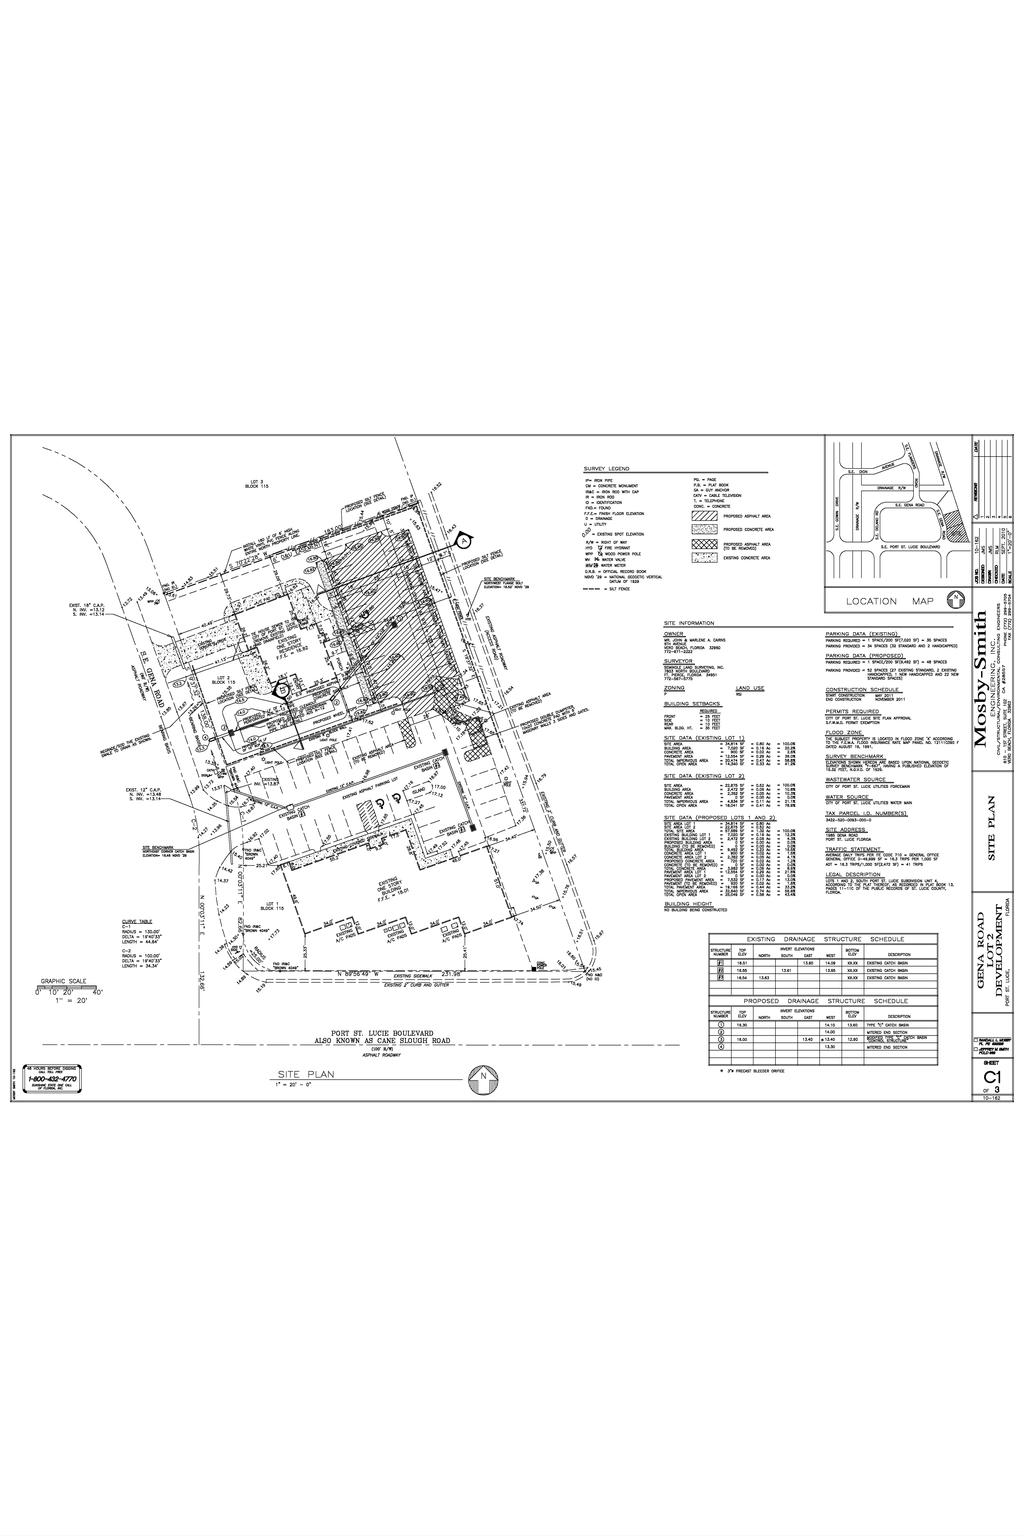 EXISTING SITE PLAN